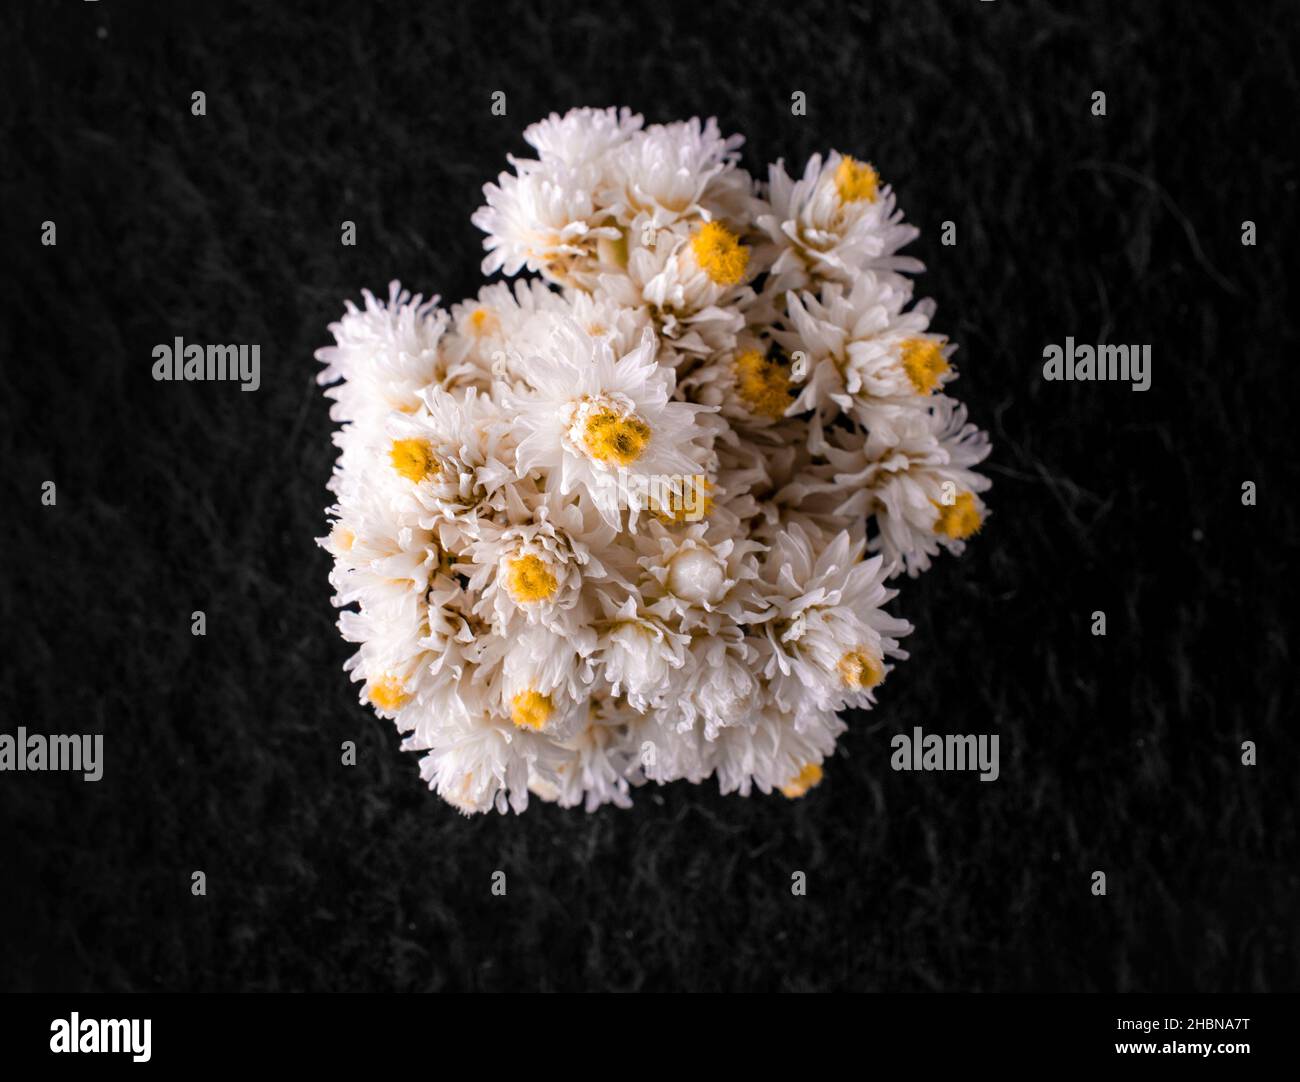 One flower on a black background. Flat lay, top view. Stock Photo